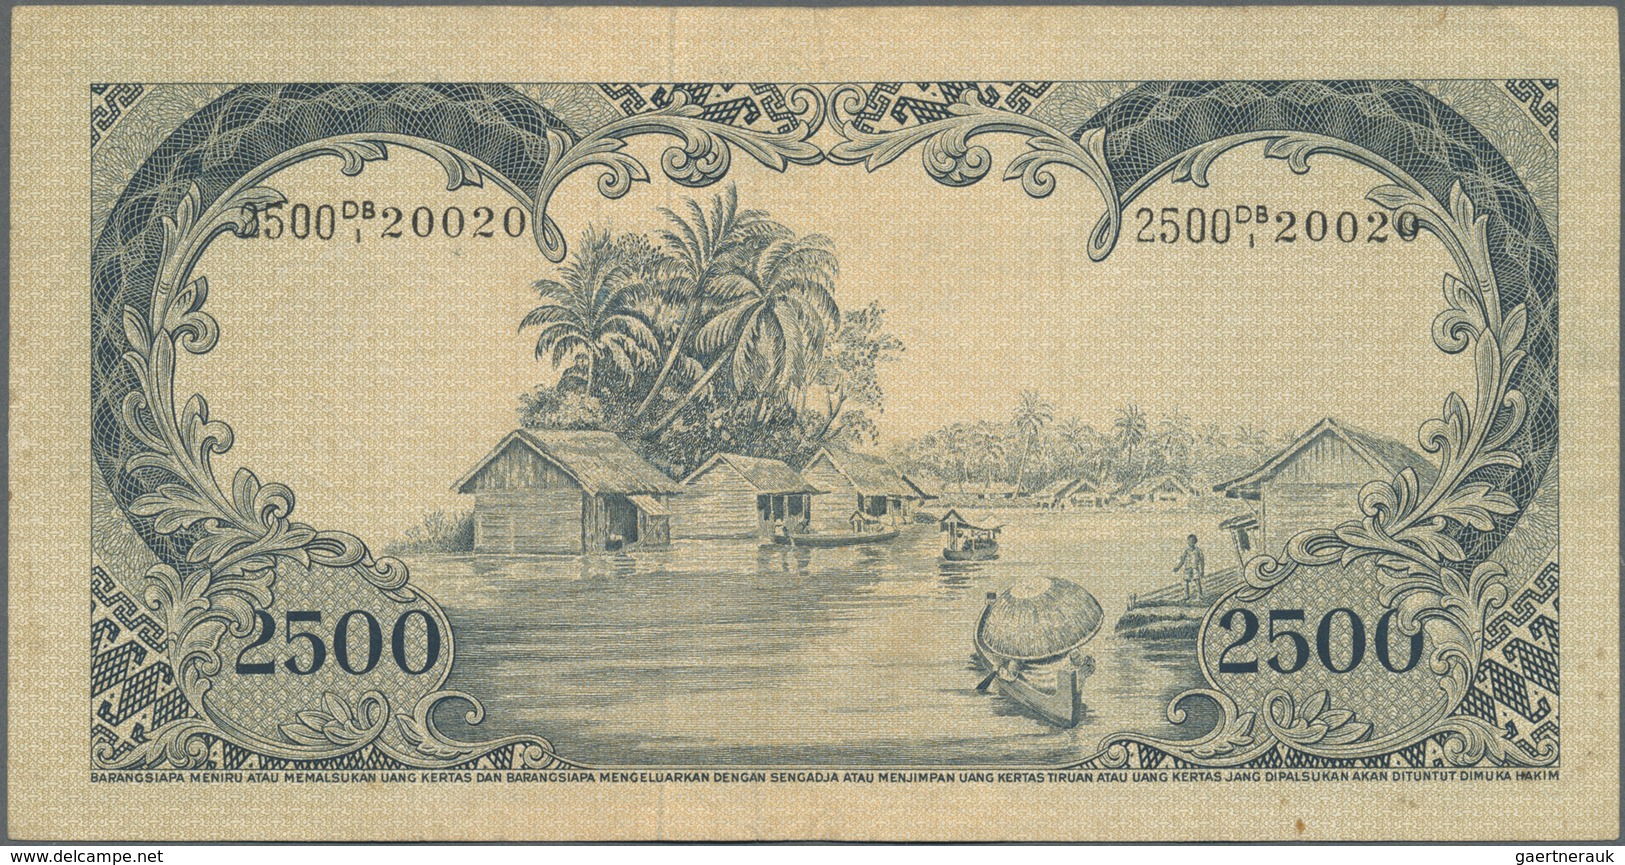 Indonesia / Indonesien: 2500 Rupiah 1957 P. 54, Used With Folds And Light Stain In Paper, No Holes O - Indonesia